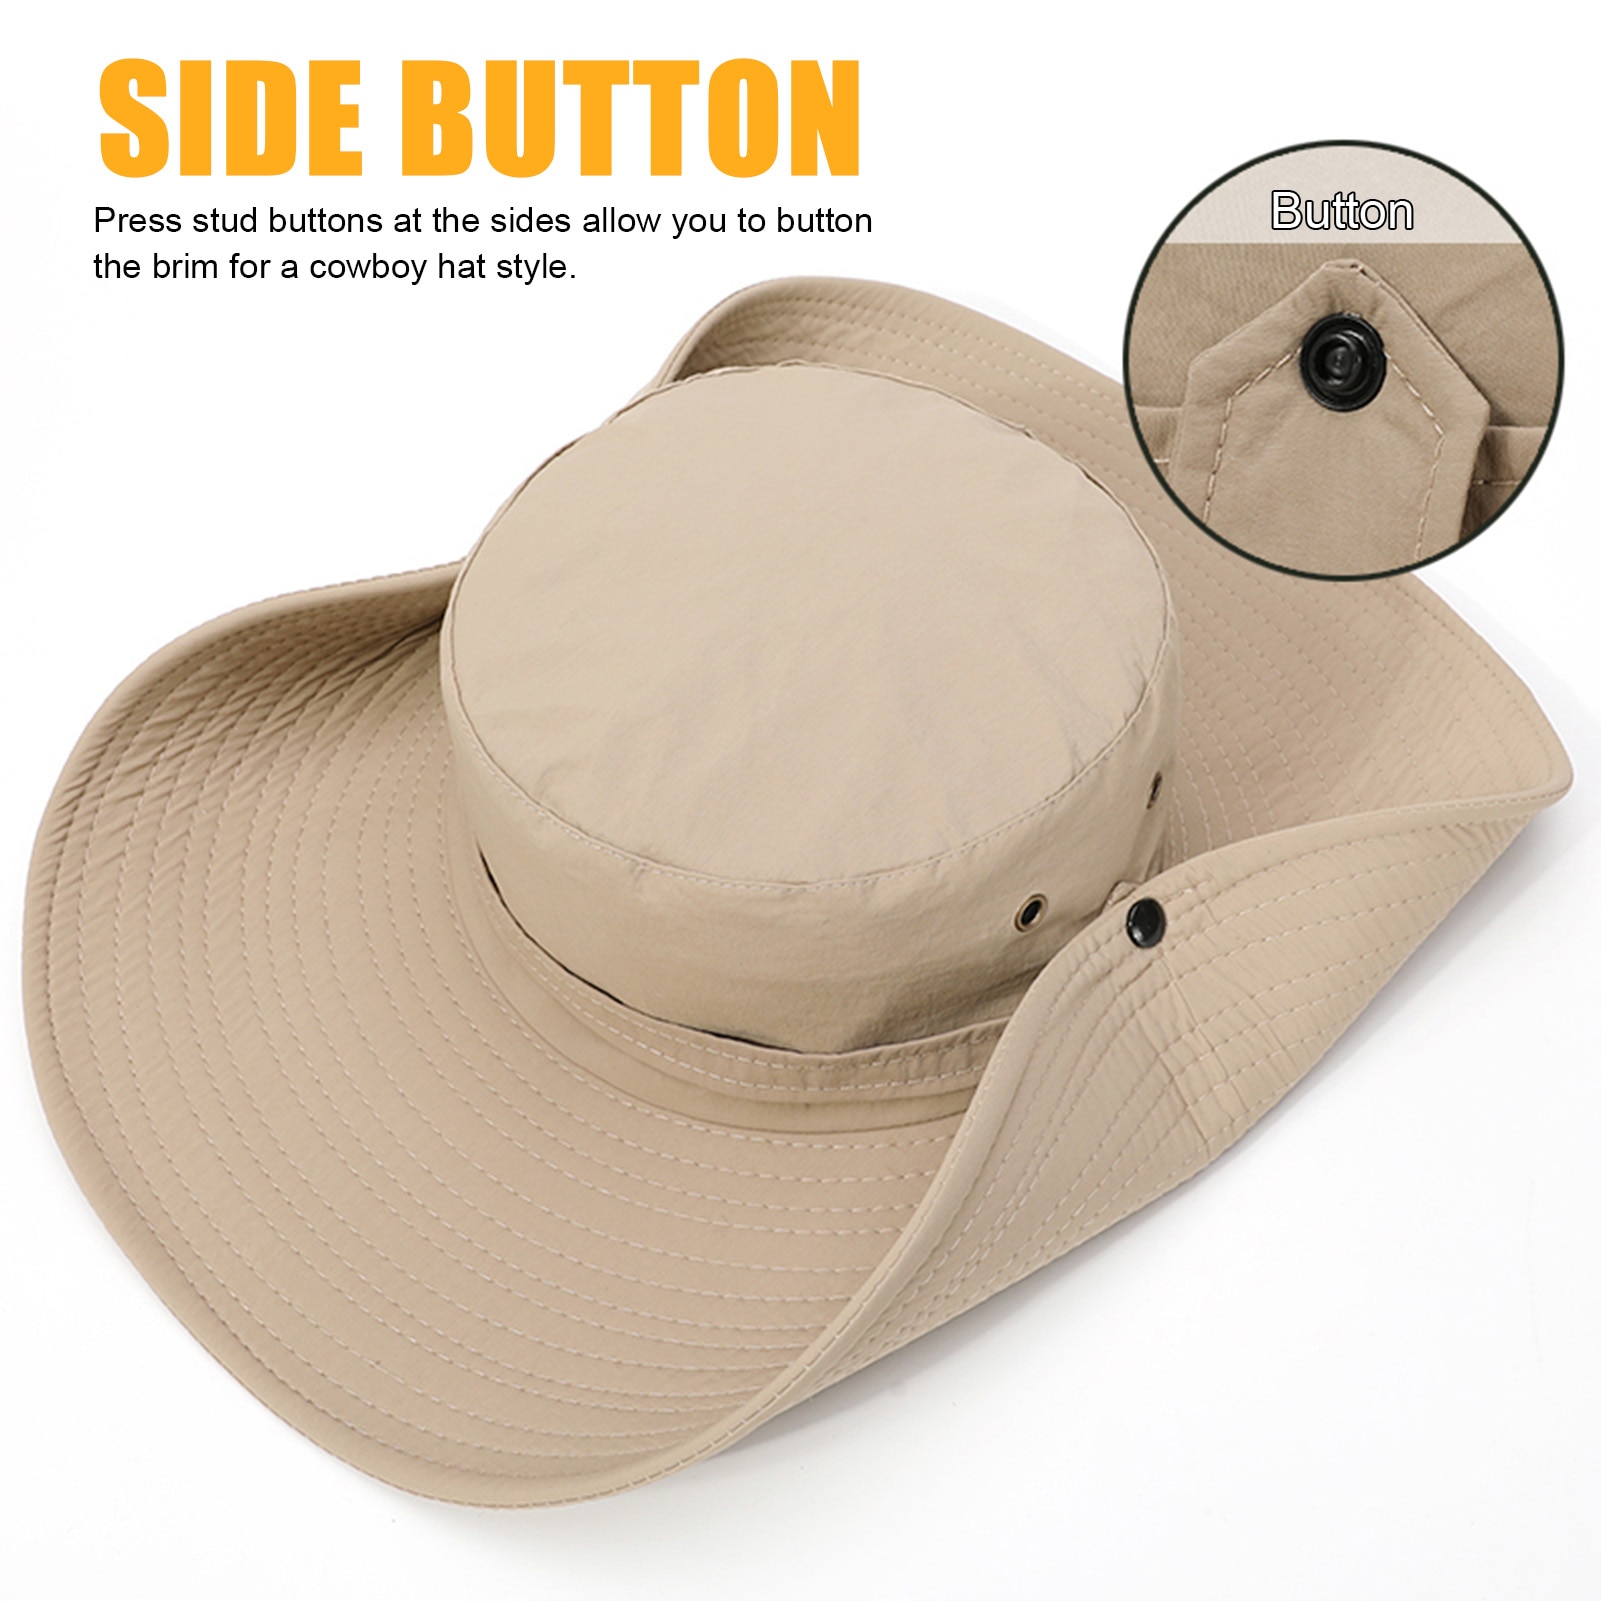 Foldable Wide Brim Sun Hat for Fishing and Hiking